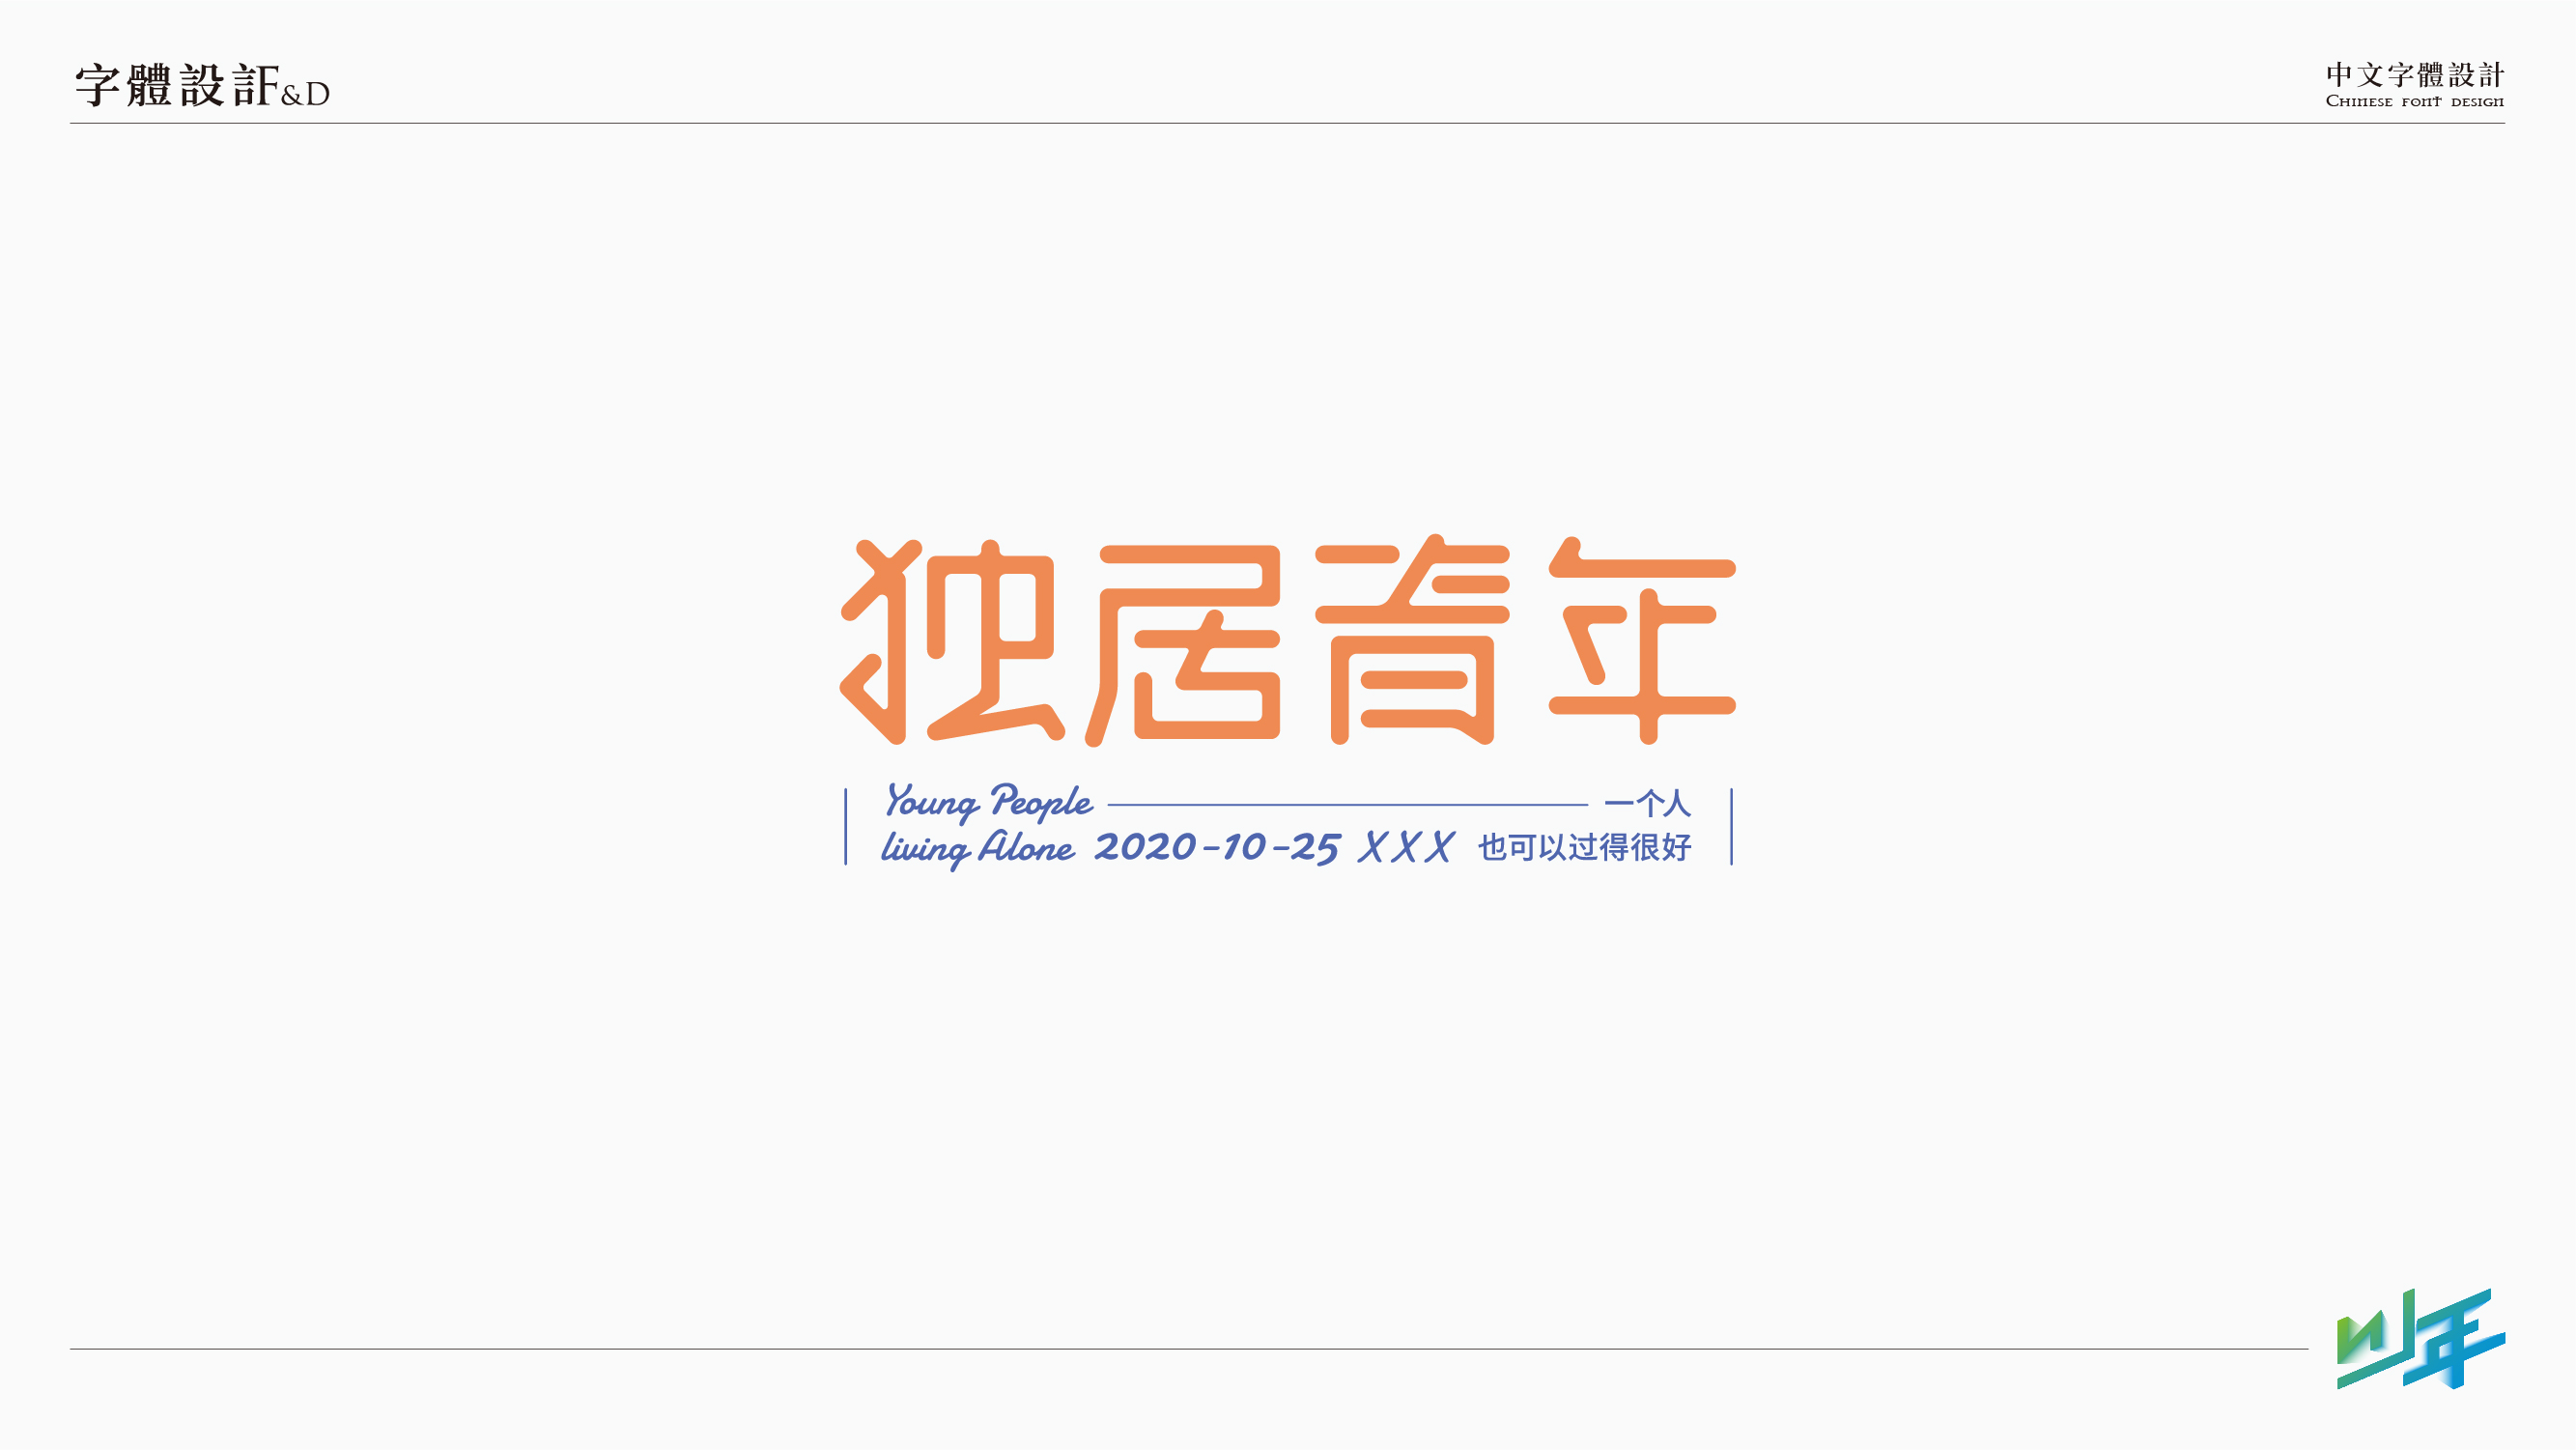 11P Collection of the latest Chinese font design schemes in 2021 #.318